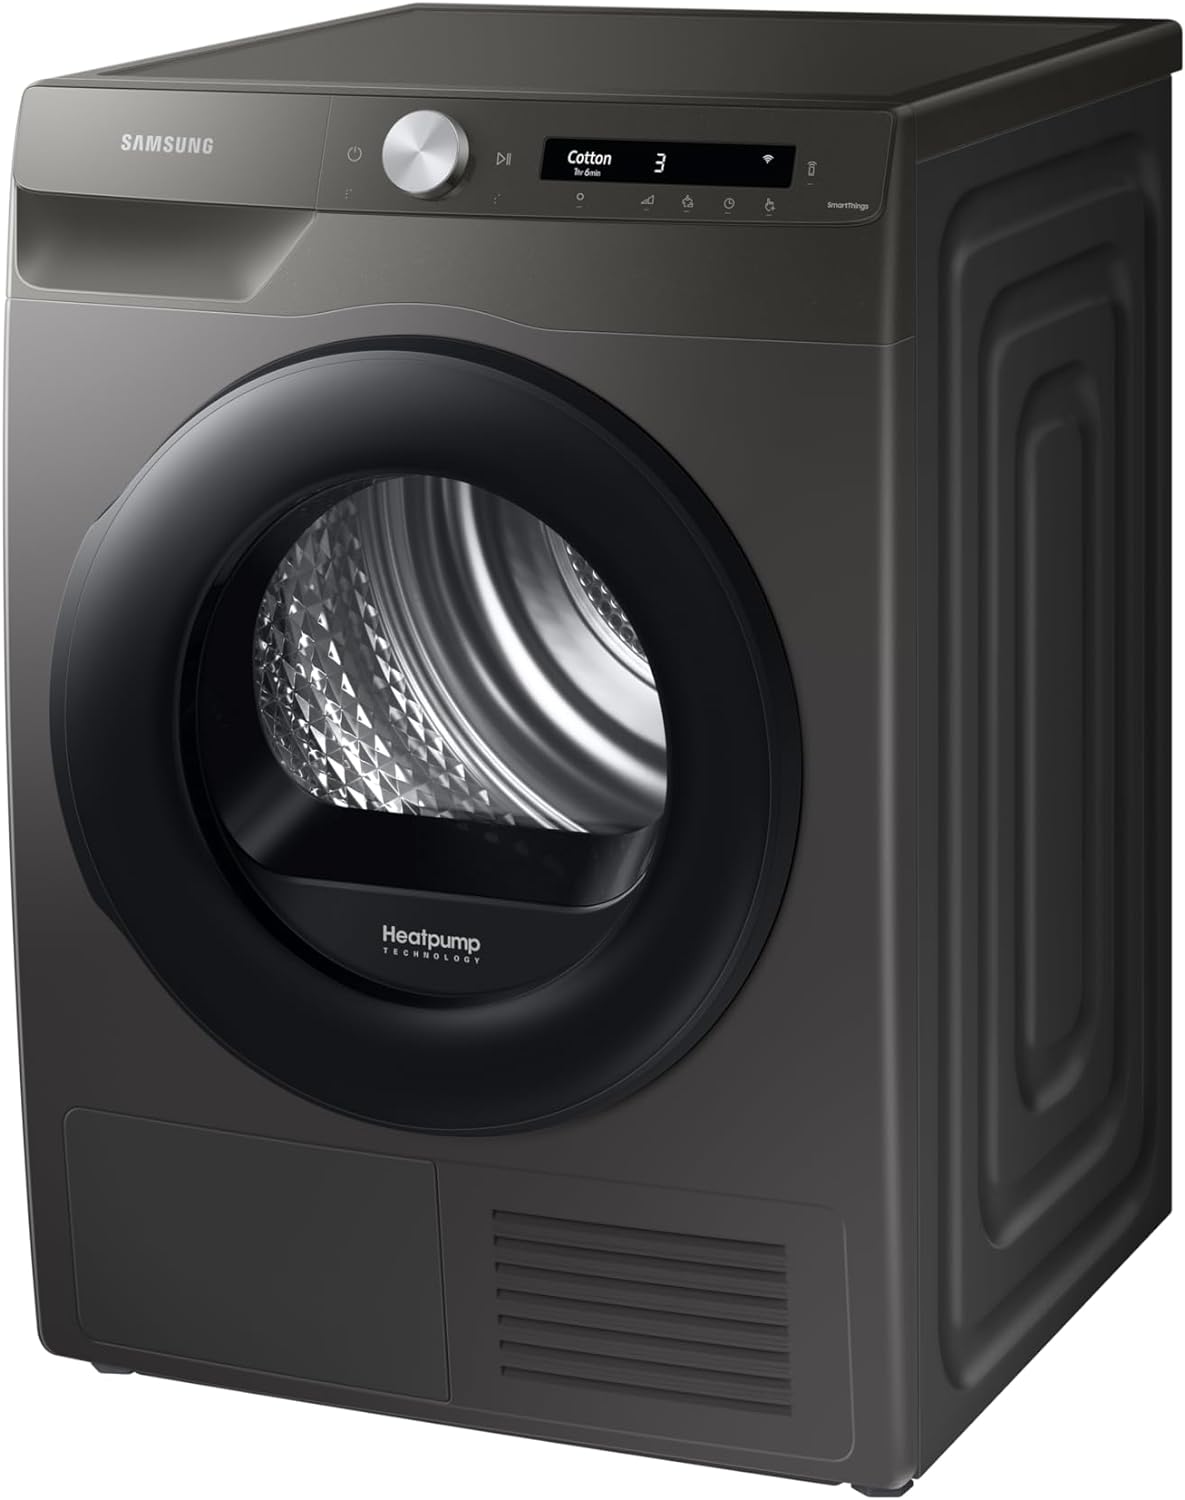 Samsung Series 5+ DV80T5220AN/S1 WiFi - enabled 8 kg Heat Pump Tumble Dryer - Graphite - A+++ Rated - Amazing Gadgets Outlet